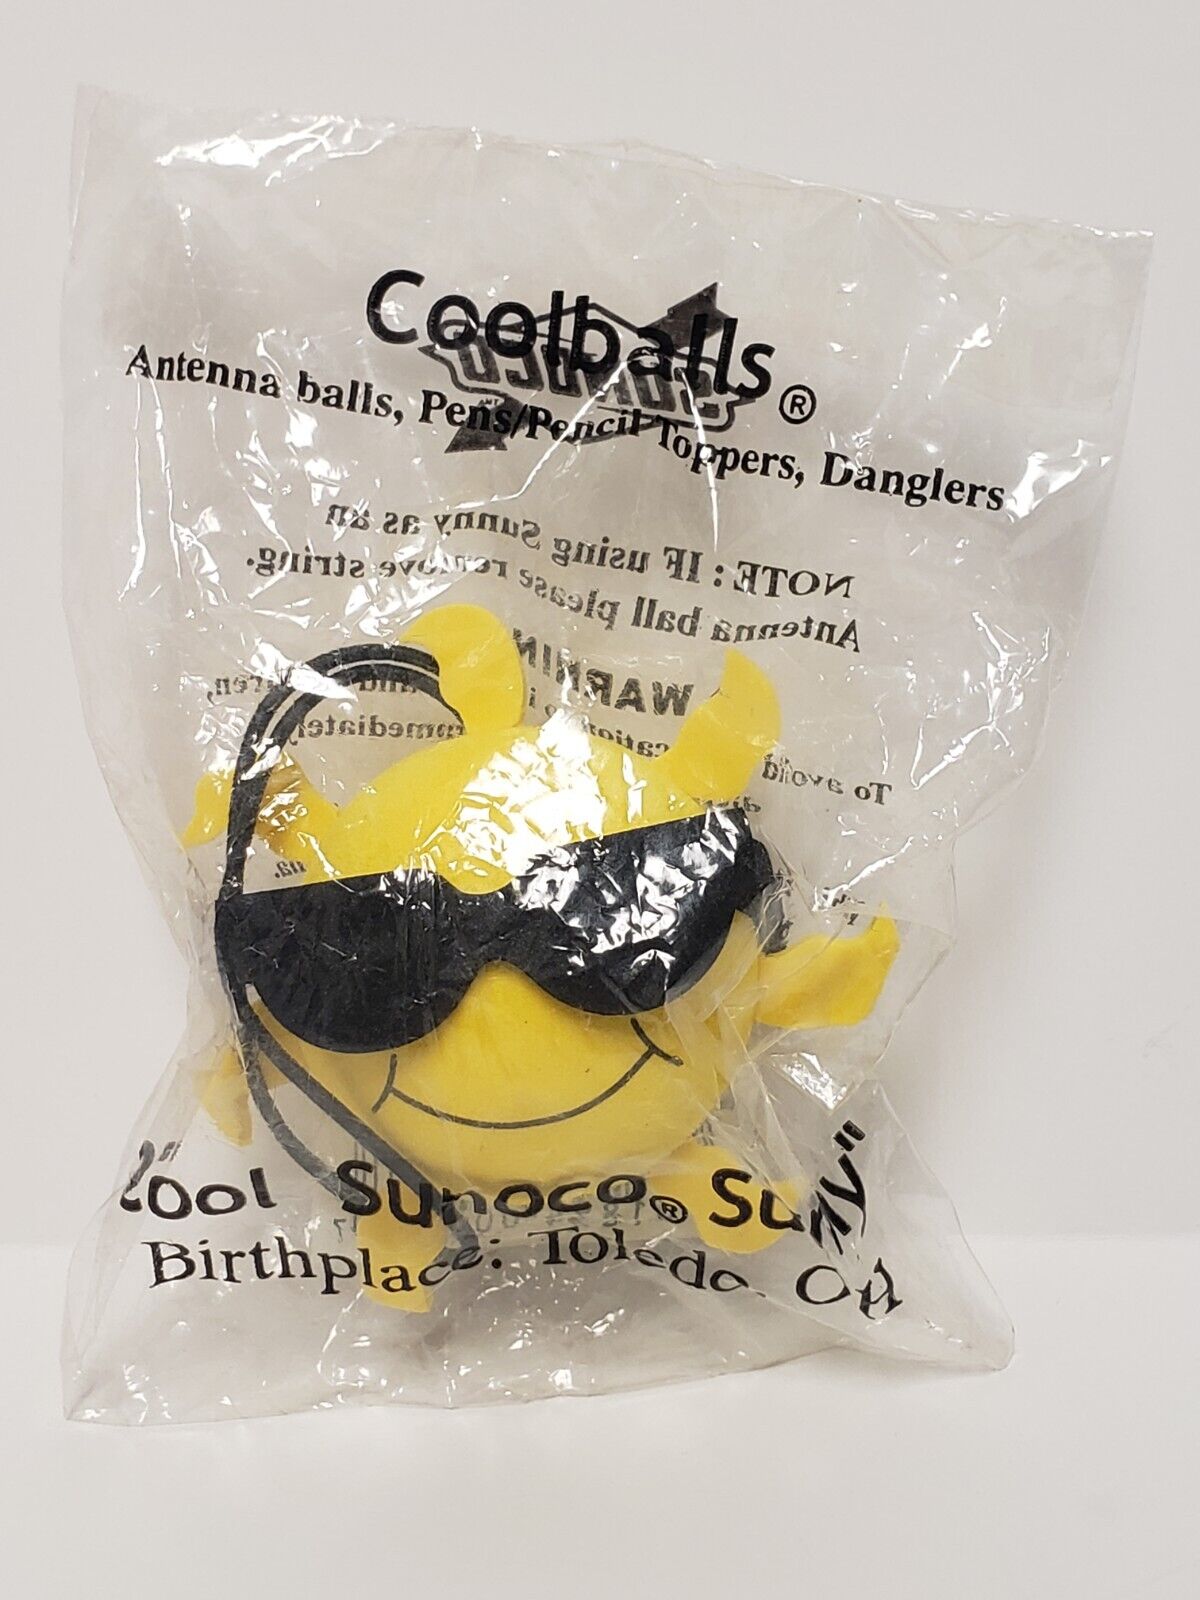 Coolballs Sunoco Sunny Antenna Ball Pen/Pencil Topper Dangler New in Package